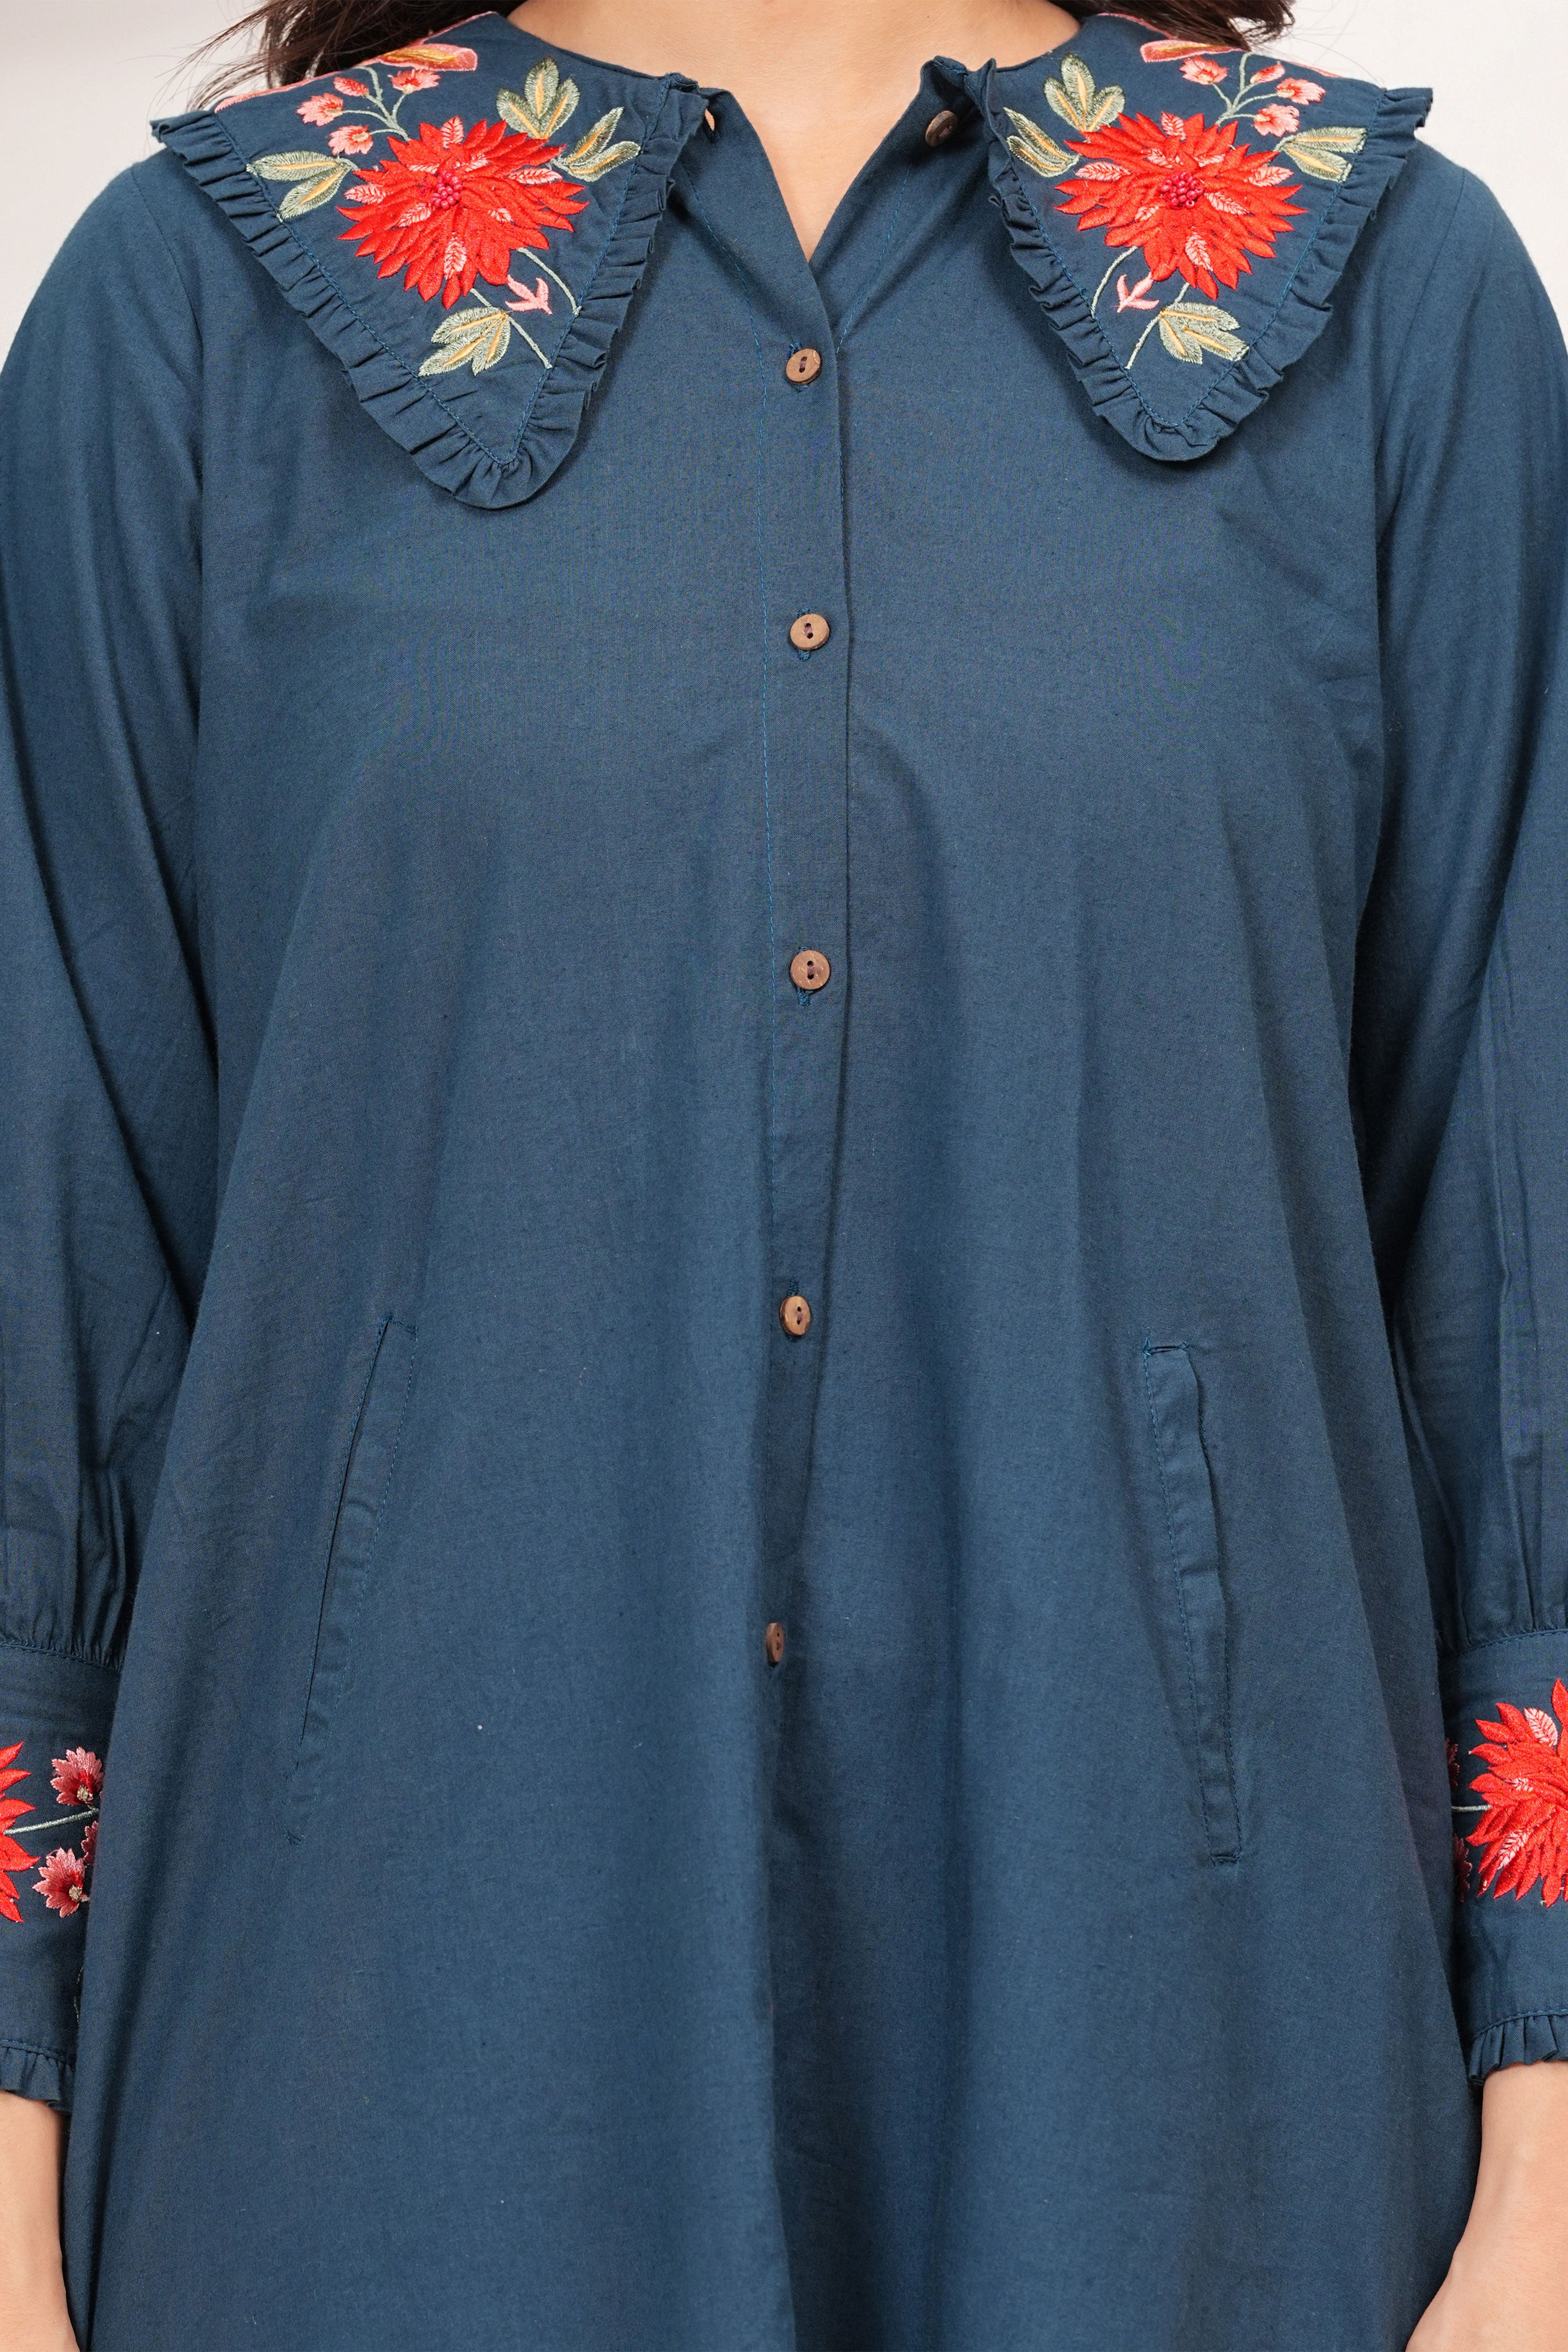 Navy Blue Floral Embroidered Collar Cotton Dress